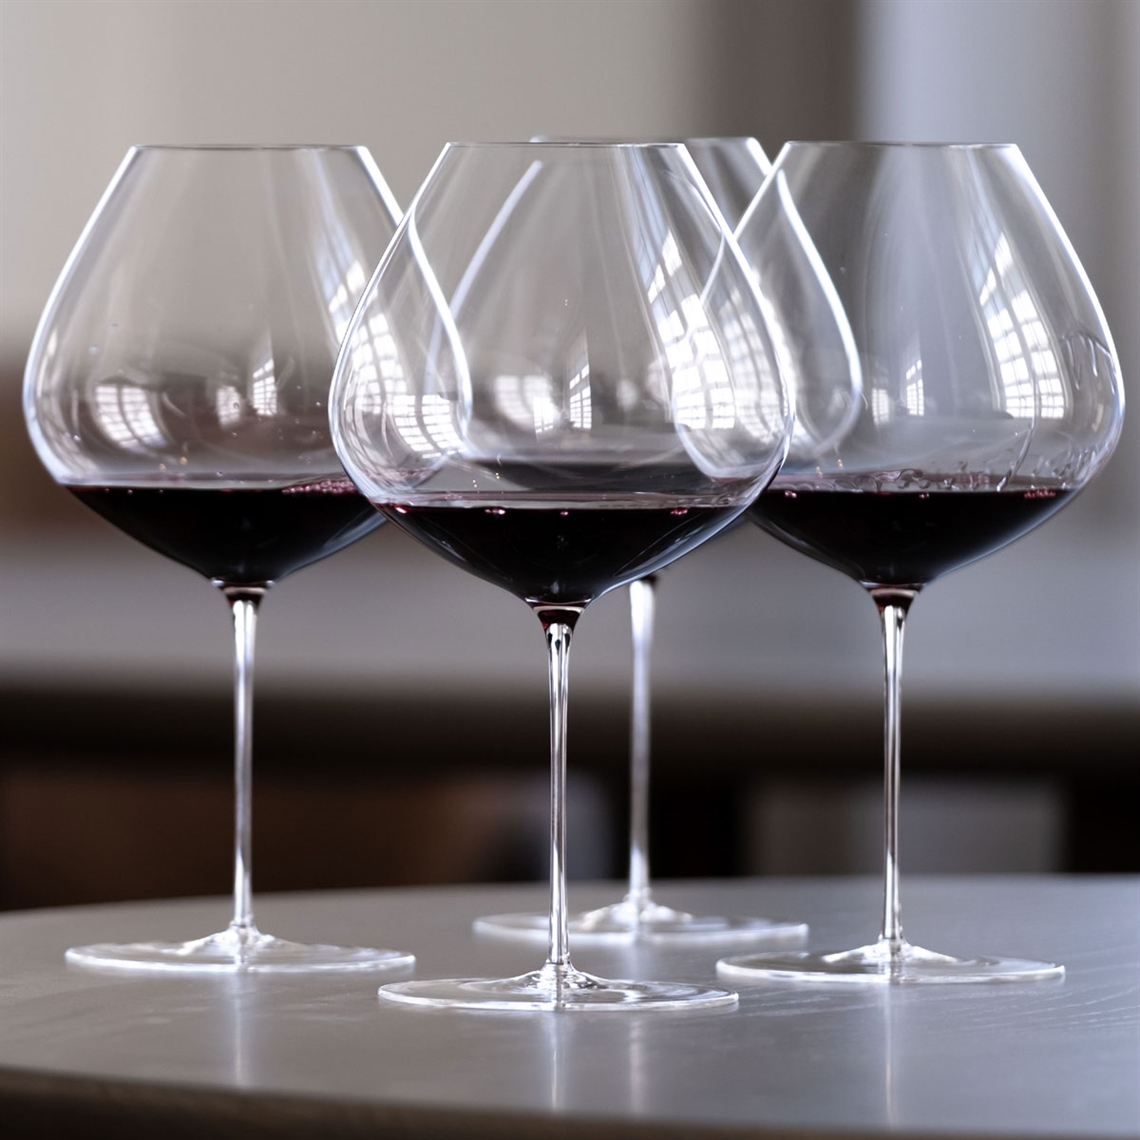 Sydonios Terroir Collection - Le Septentrional Red Wine Glass - Set of 6